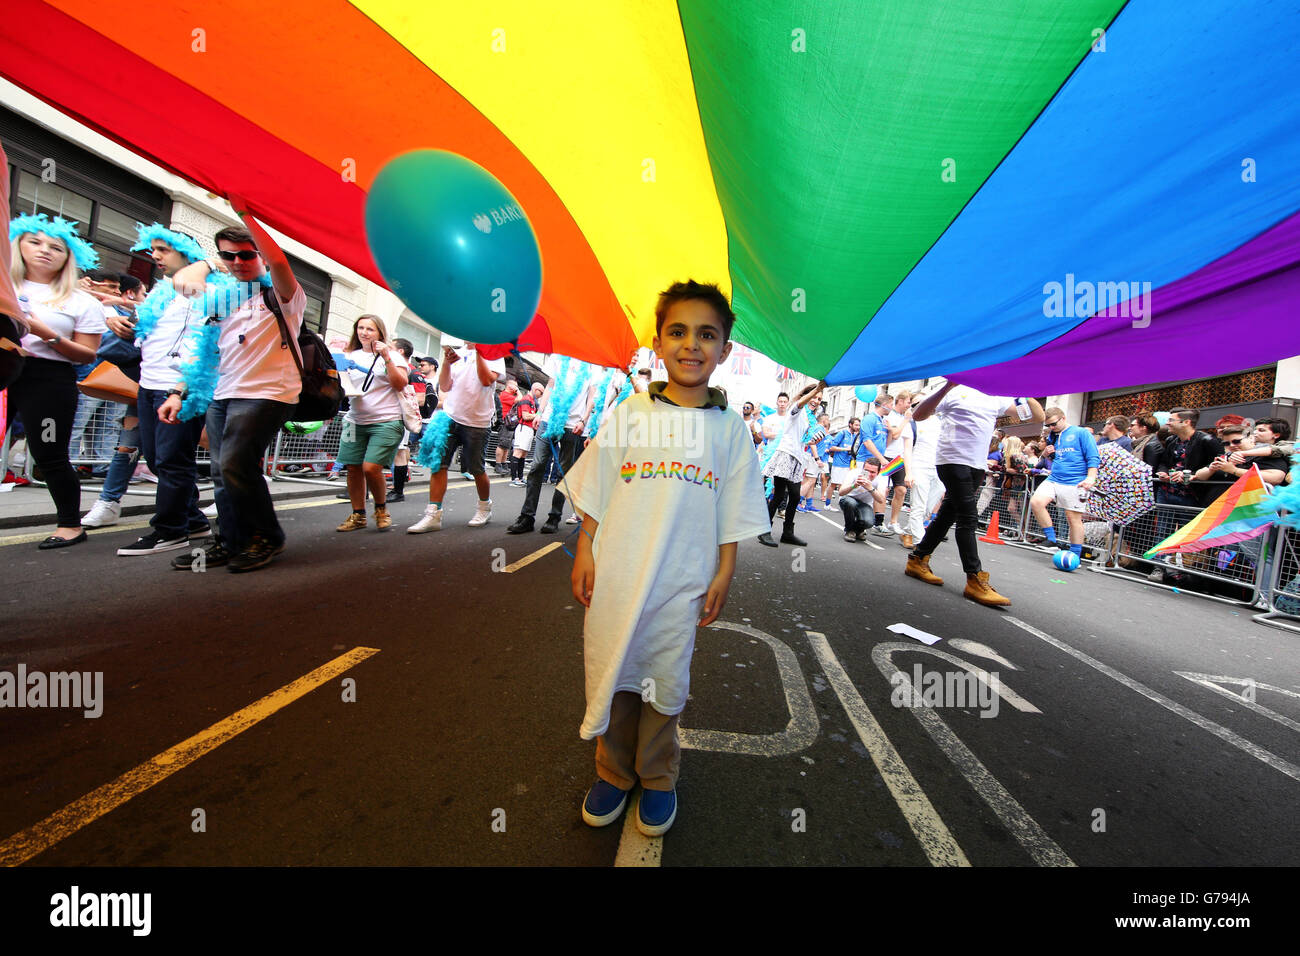 London, UK. 25th June 2016. Participants at the Pride London Parade in London where the theme is #nofilter Credit:  Paul Brown/Alamy Live News Stock Photo